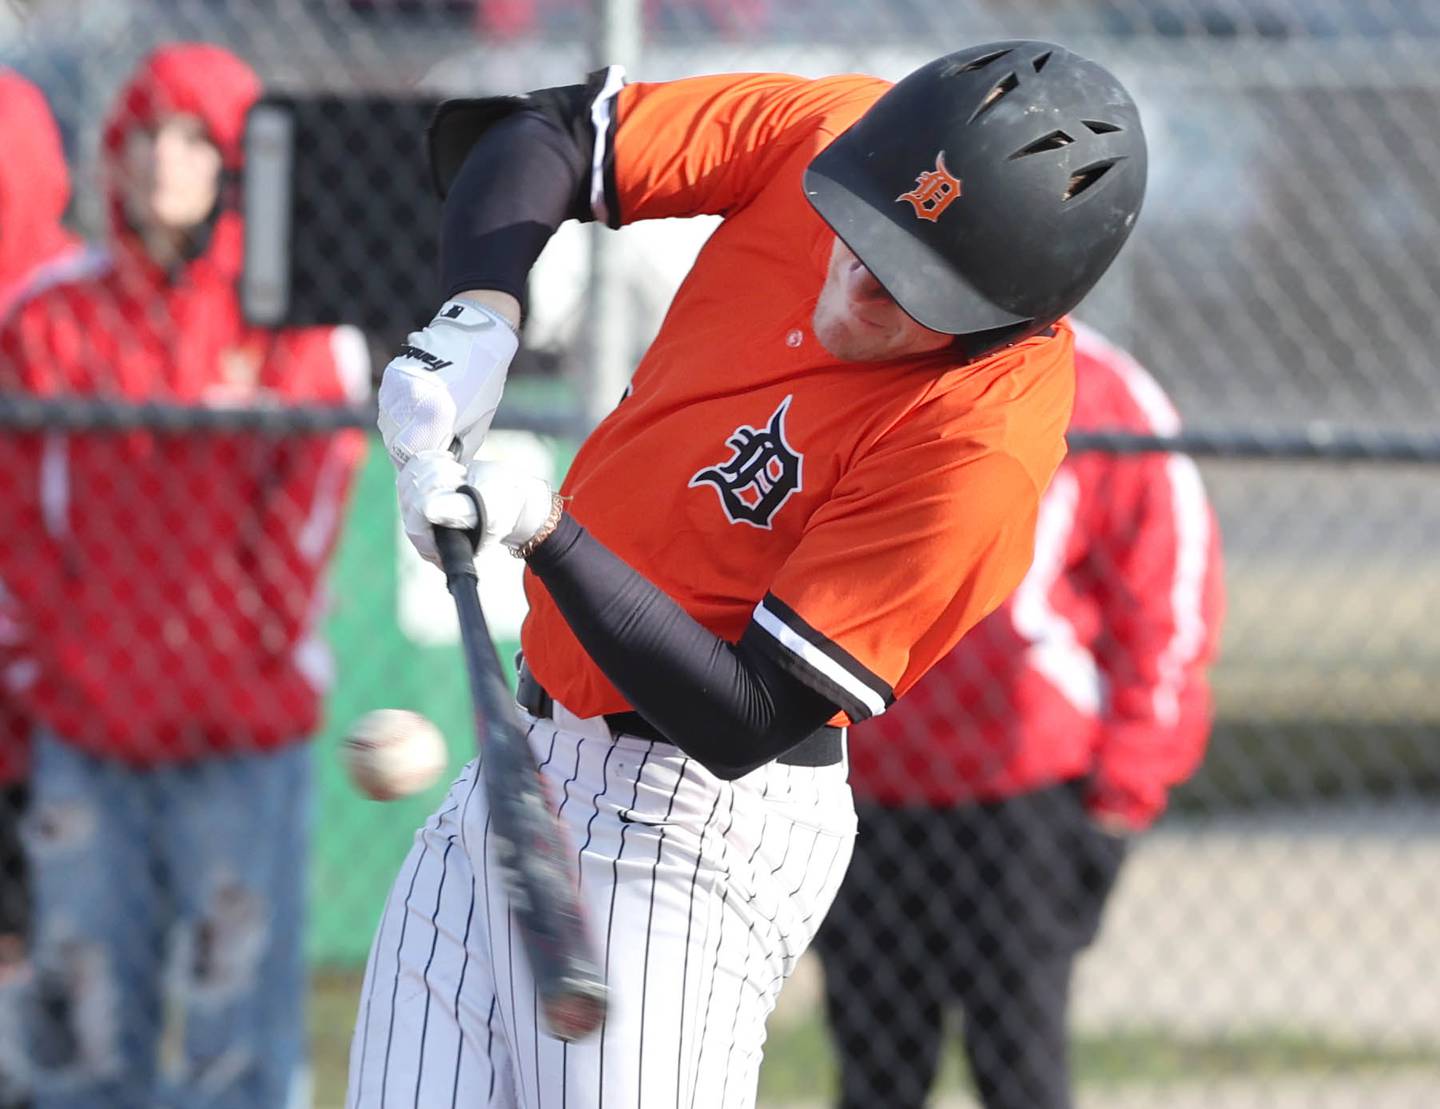 DeKalb's Jack Keck makes contact during their game against Jefferson Wednesday, April 6, 2022, at DeKalb High School.